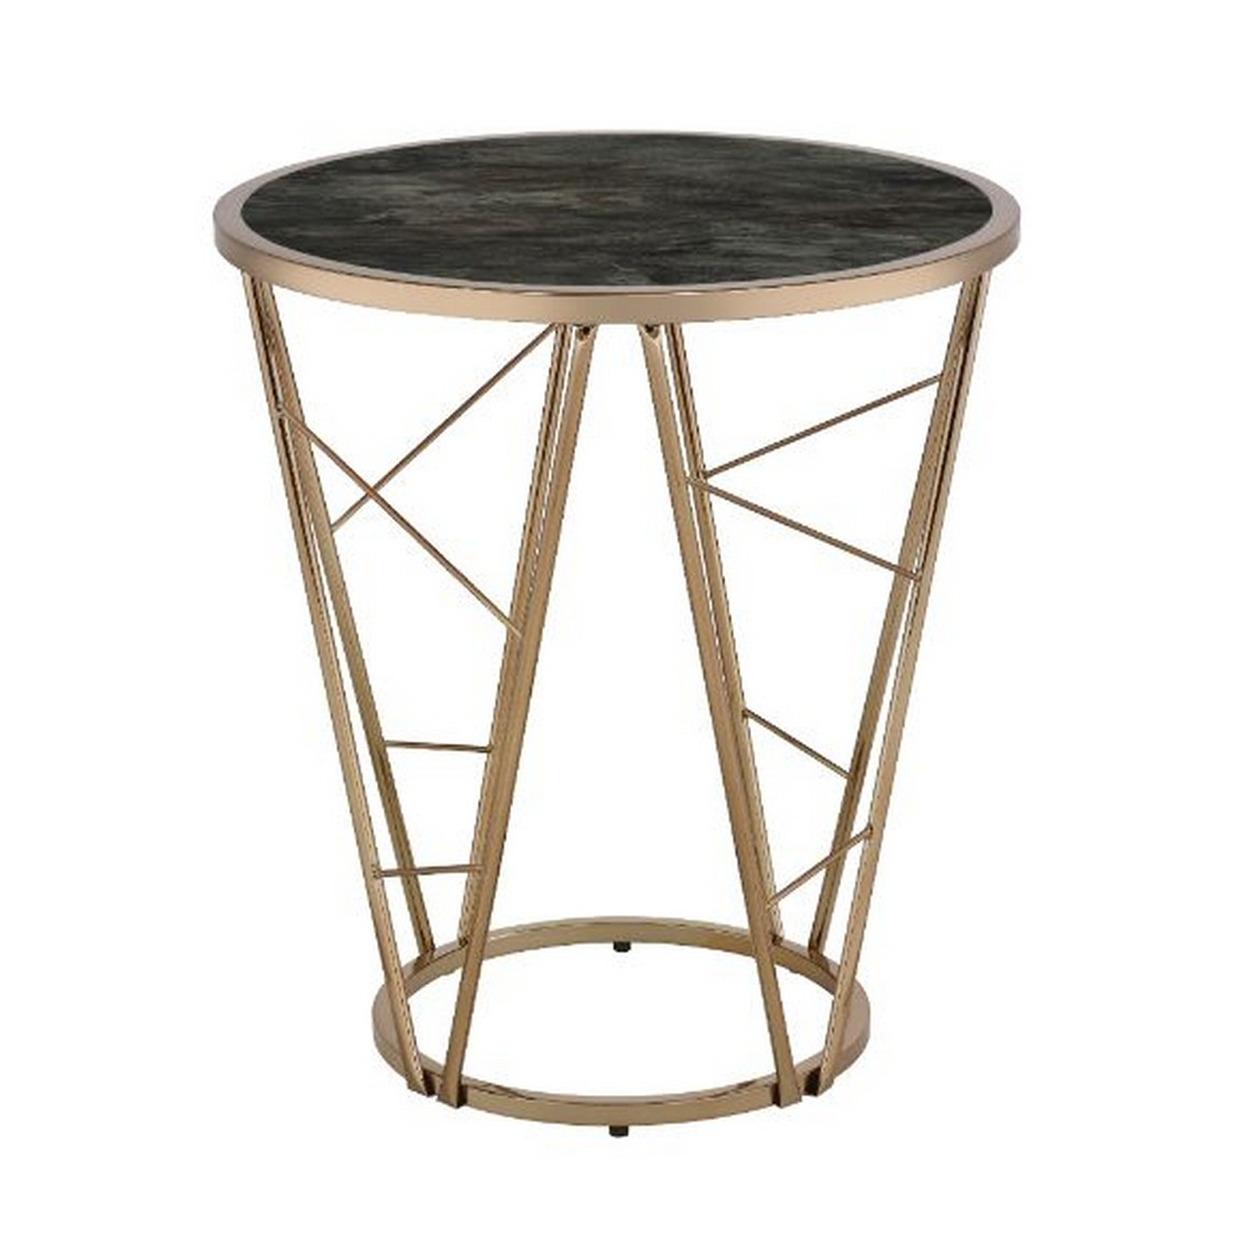 End Table With Glass Top And Geometric Frame, Black And Gold- Saltoro Sherpi